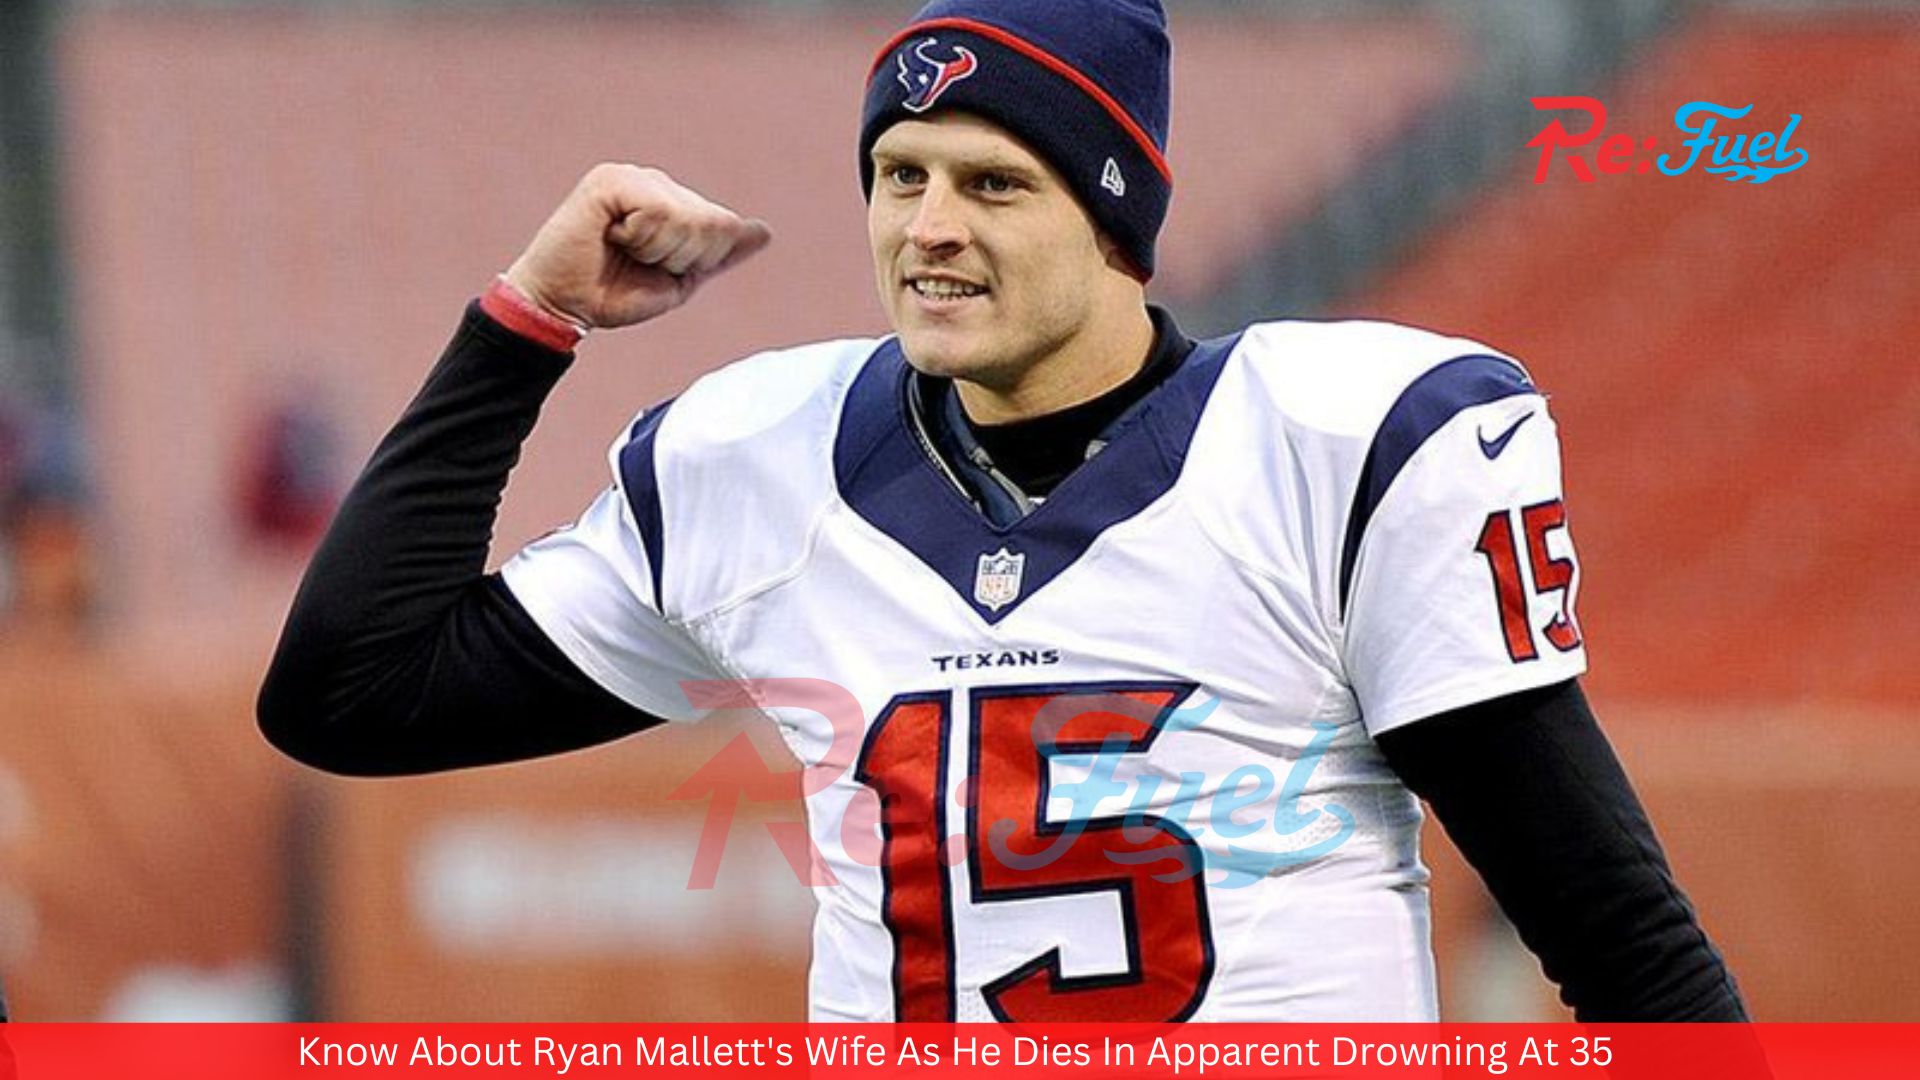 Know About Ryan Mallett's Wife As He Dies In Apparent Drowning At 35